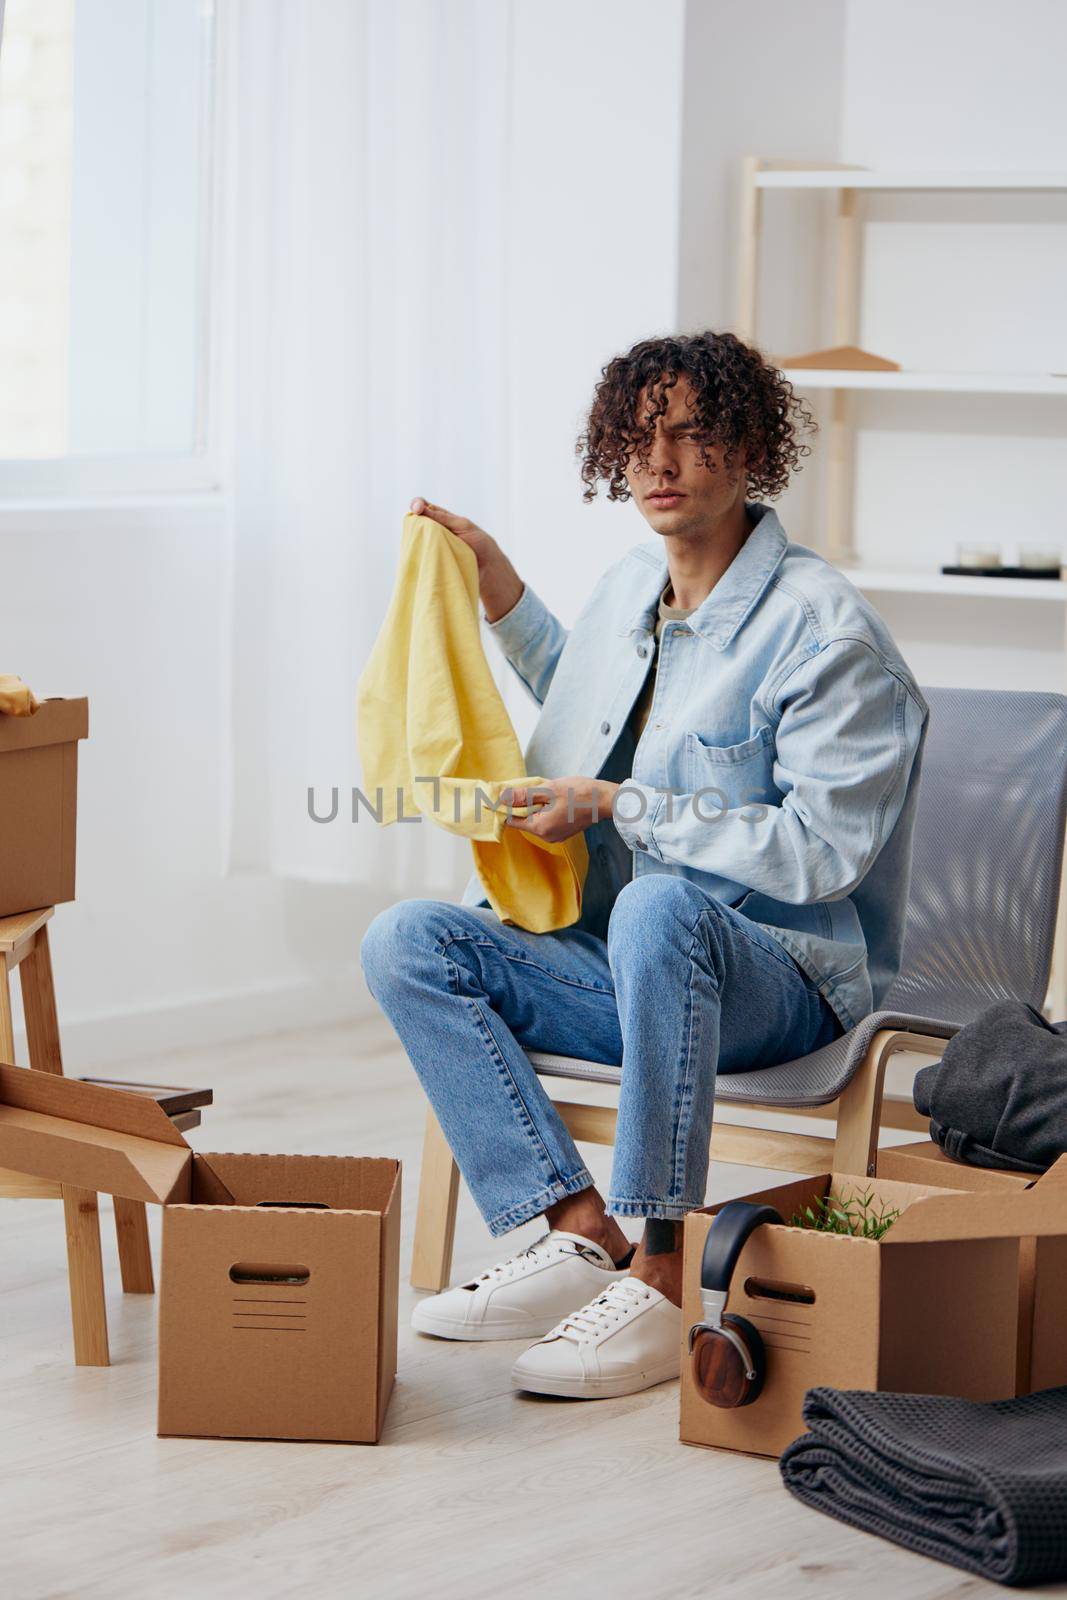 A young man cardboard boxes in the room unpacking interior. High quality photo